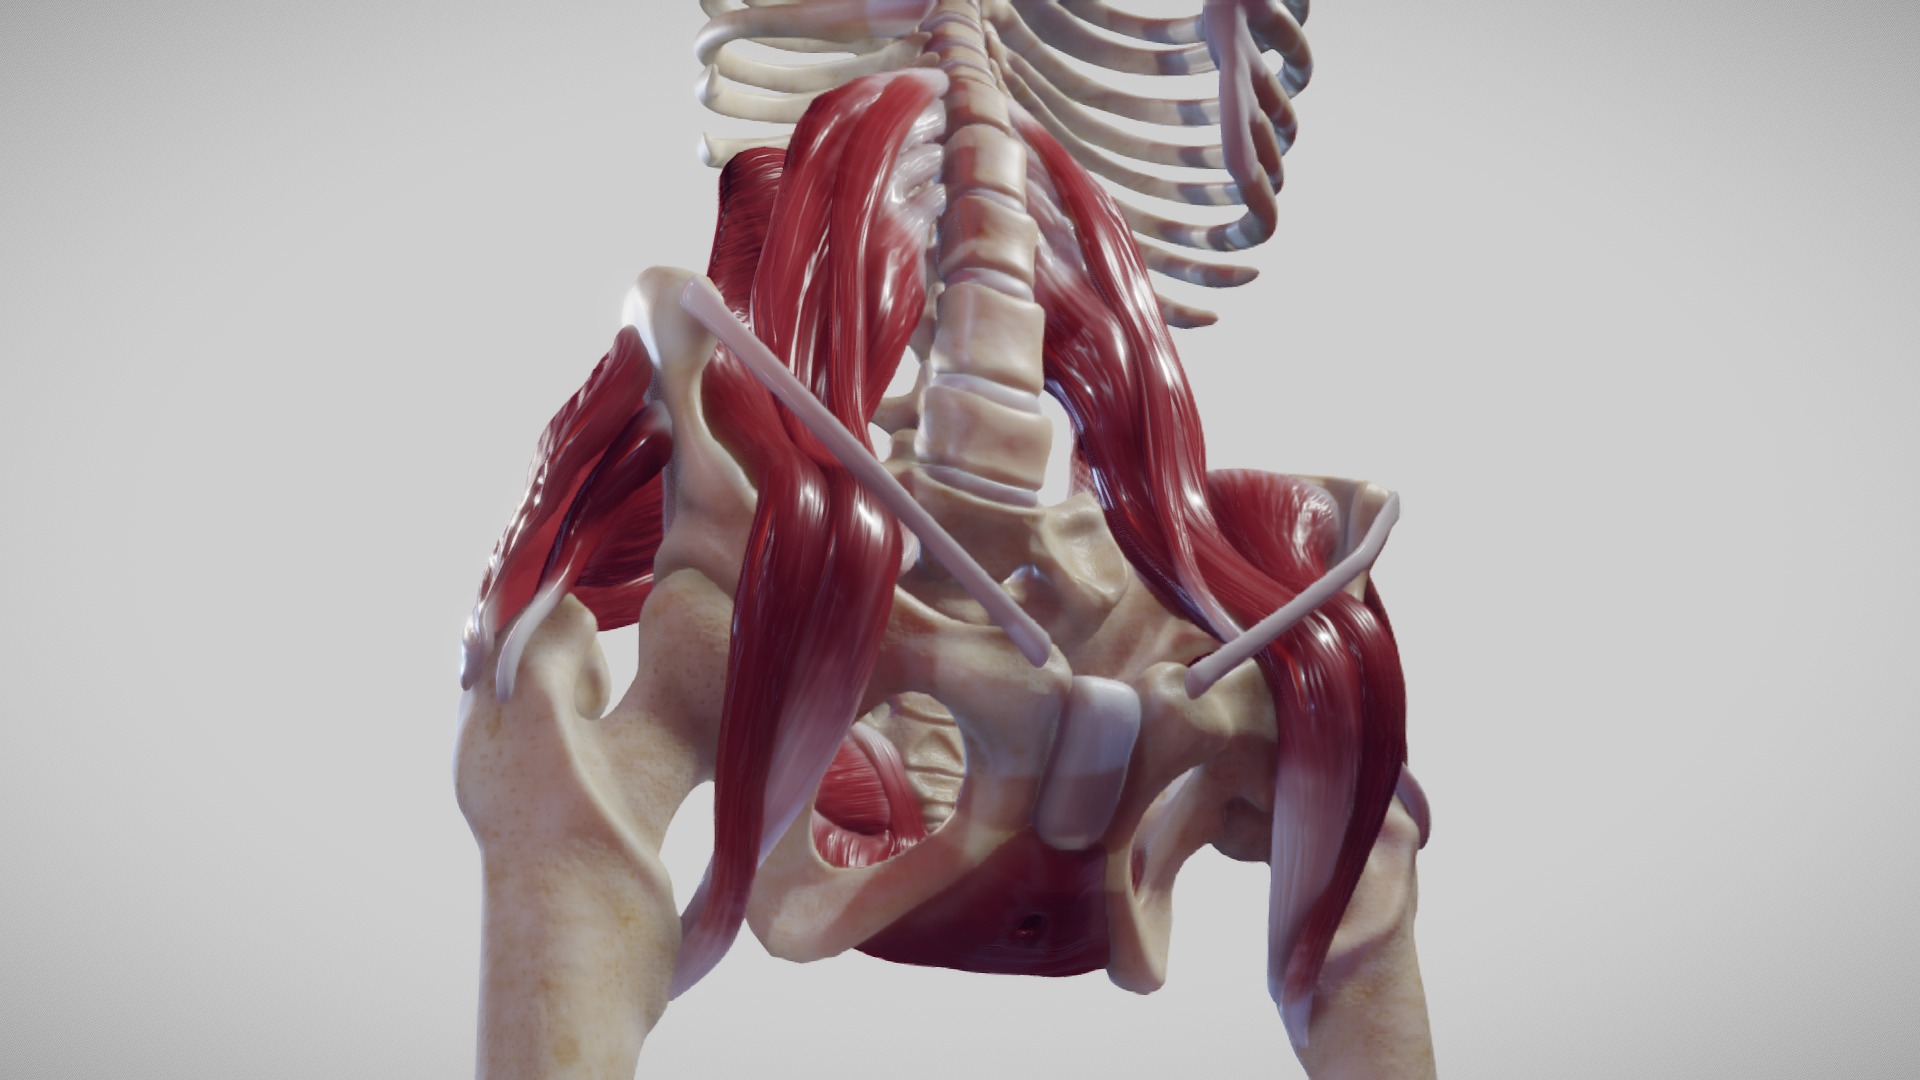 Female chest and abdomen muscles anatomy for medical concept 3d rendering ~  Clip Art #245545167